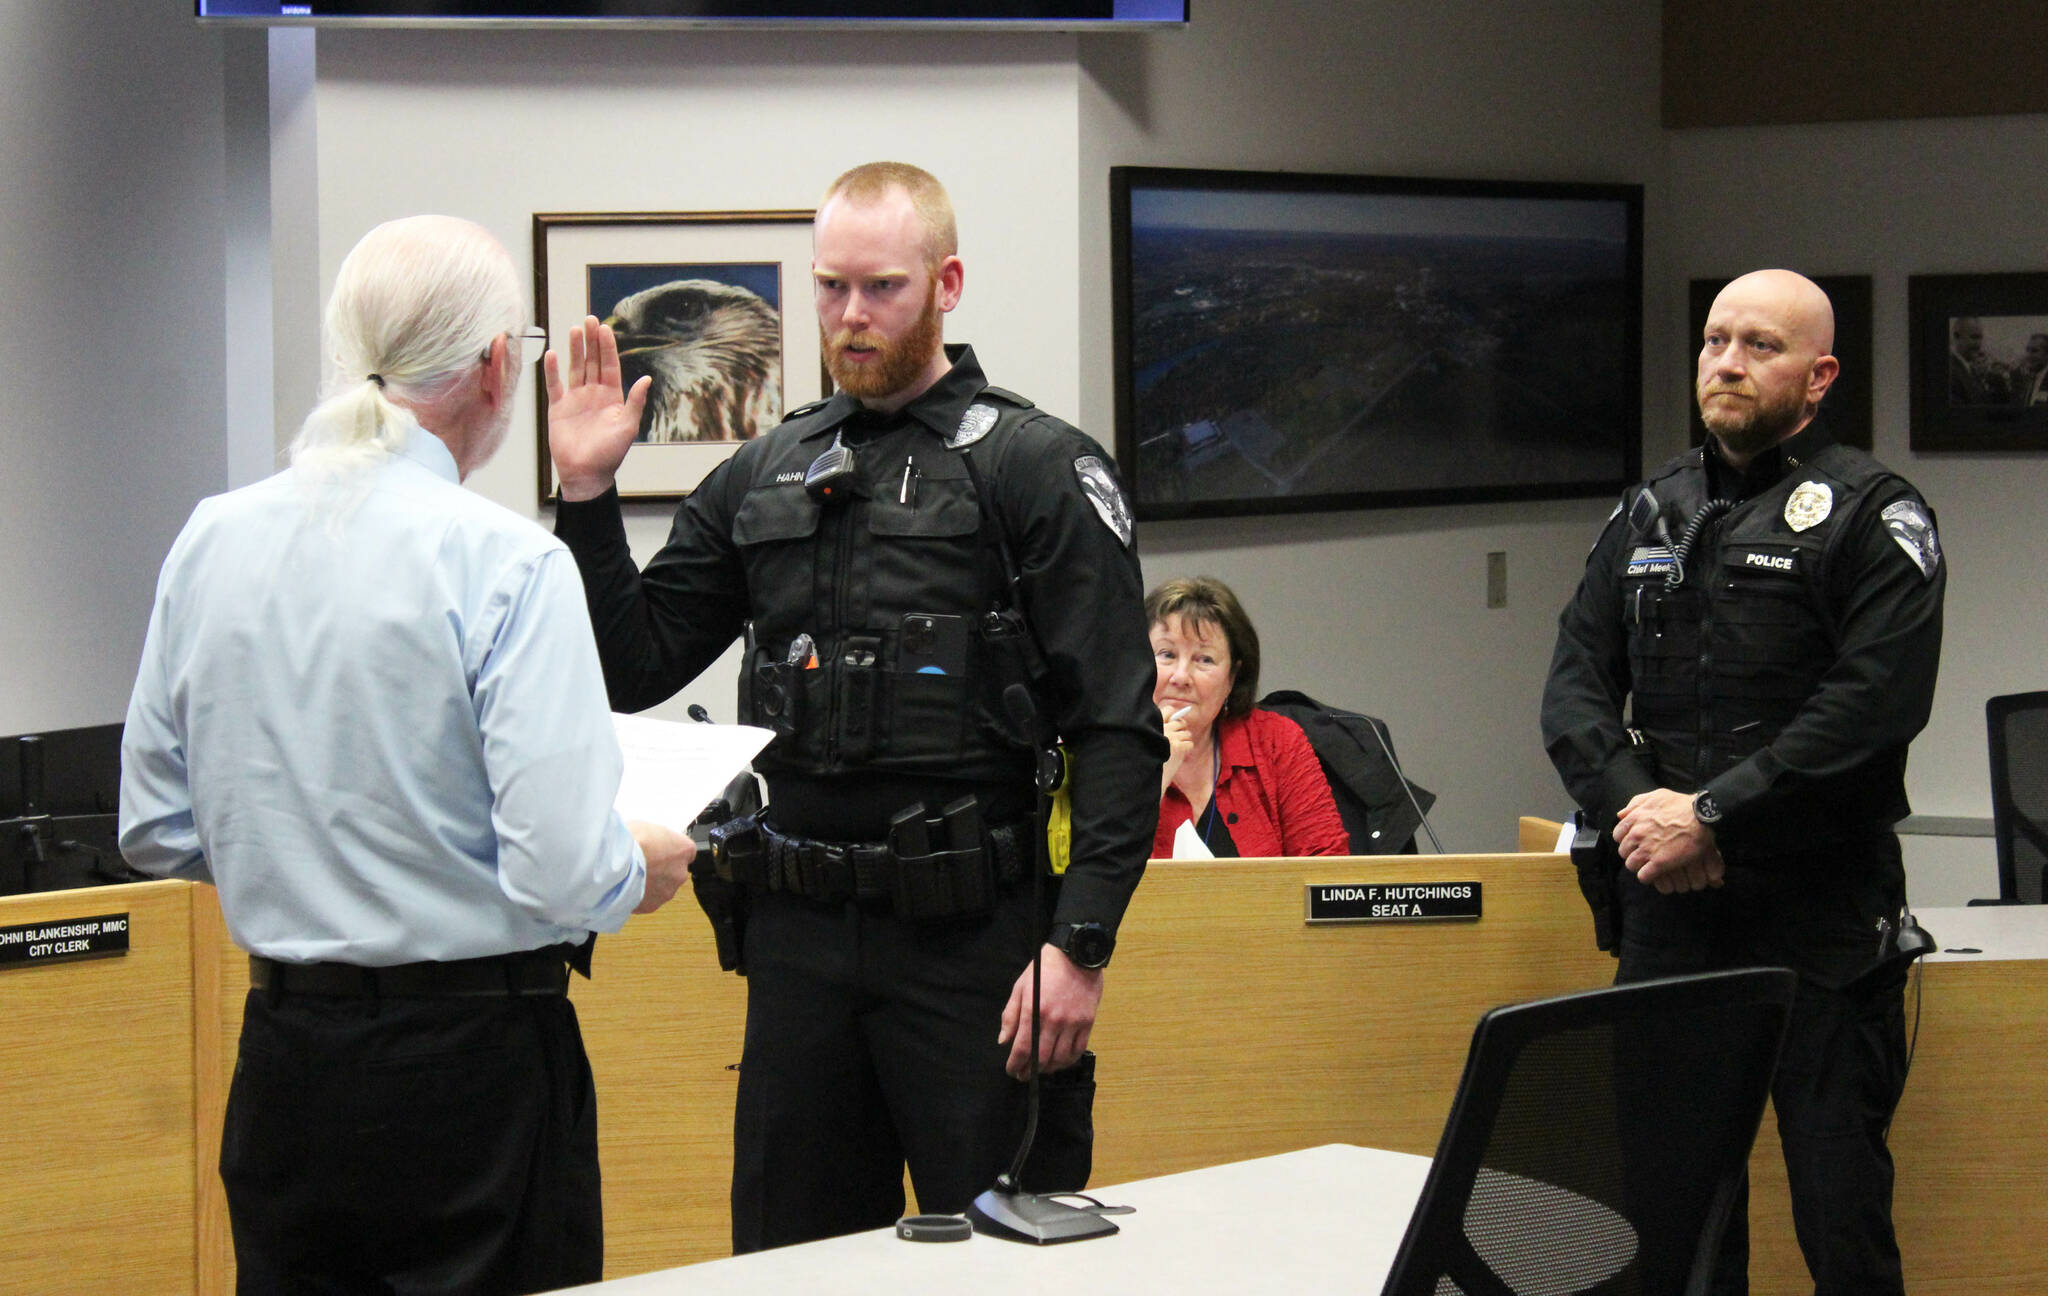 From left, Soldotna Mayor Paul Whitney swears in Soldotna Police Officer Bryan Hahn while Soldotna Police Chief Gene Meek looks on during a Soldotna City Council meeting on Wednesday, June 28, 2023 in Soldotna, Alaska. (Ashlyn O'Hara/Peninsula Clarion)